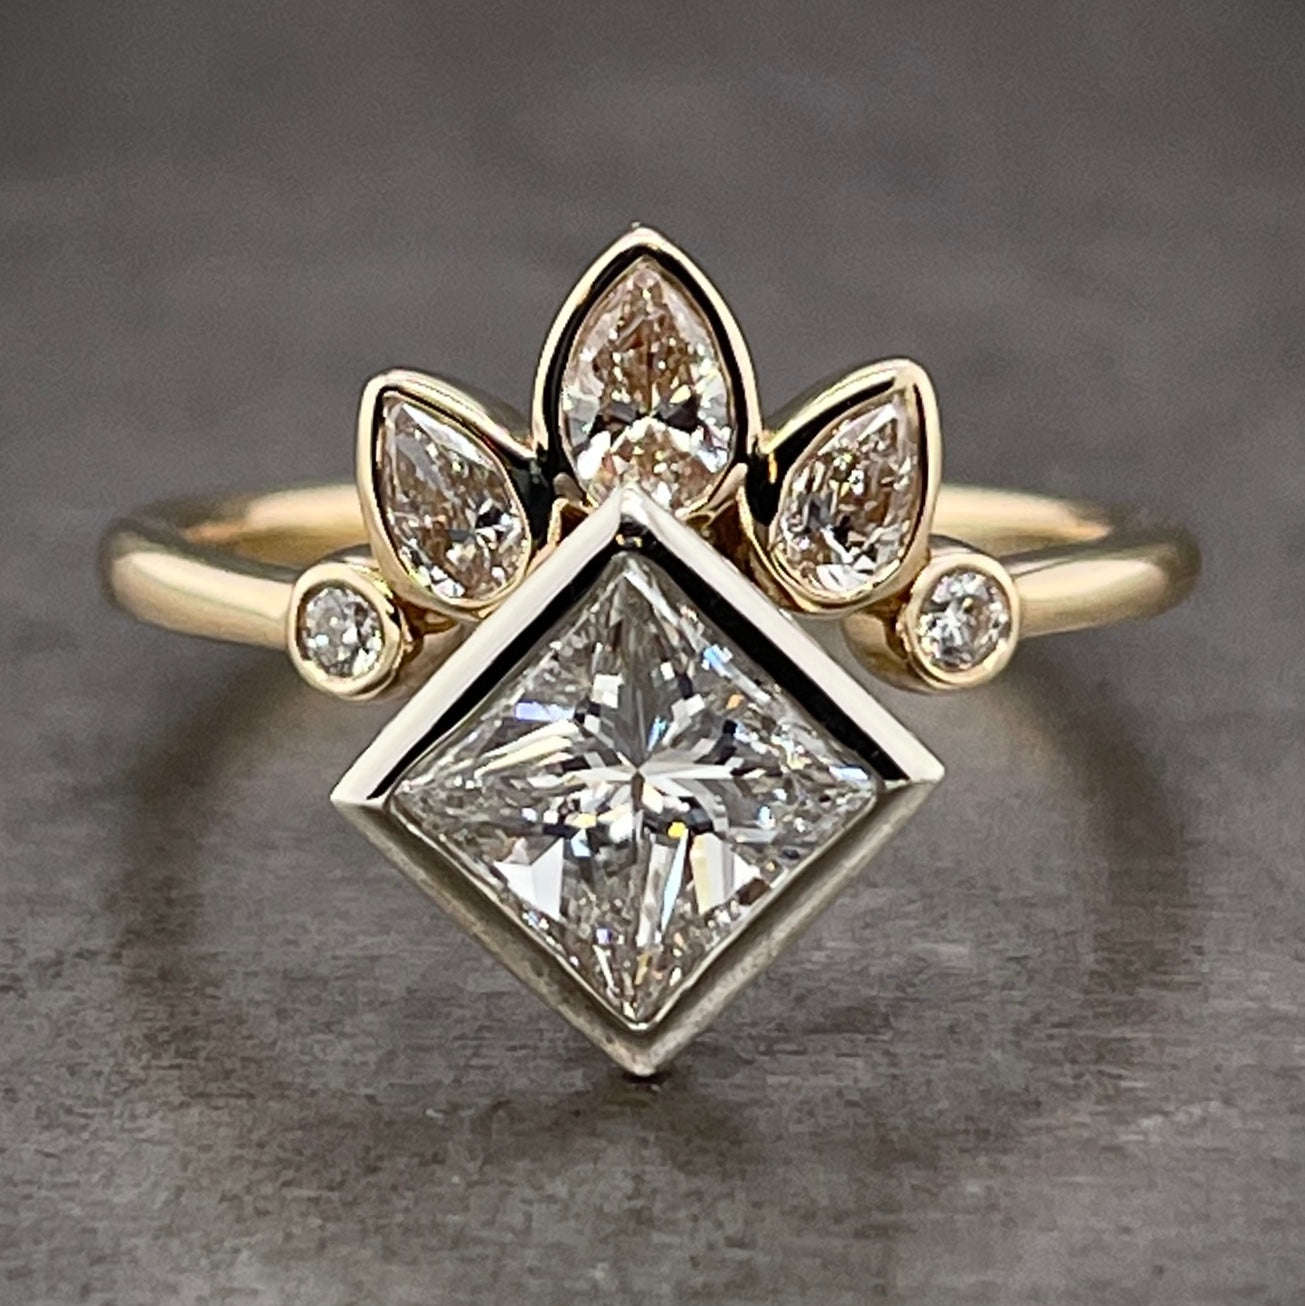 Frontal view of princess and pear cut diamond ring. A princess cut diamond is at the center, bezel set in white gold. Surrounding the top 2/5 of the ring is a tiara like diamond landscape made from pear and round diamonds. There are three pear diamonds set in the center of the tiara, with their tip pointing north (northwest and northeast for the left and right ones). Then there is one round brilliant diamond at the bottom of the tiara. They are all bezel set in yellow gold and lay on a yellow gold shank.